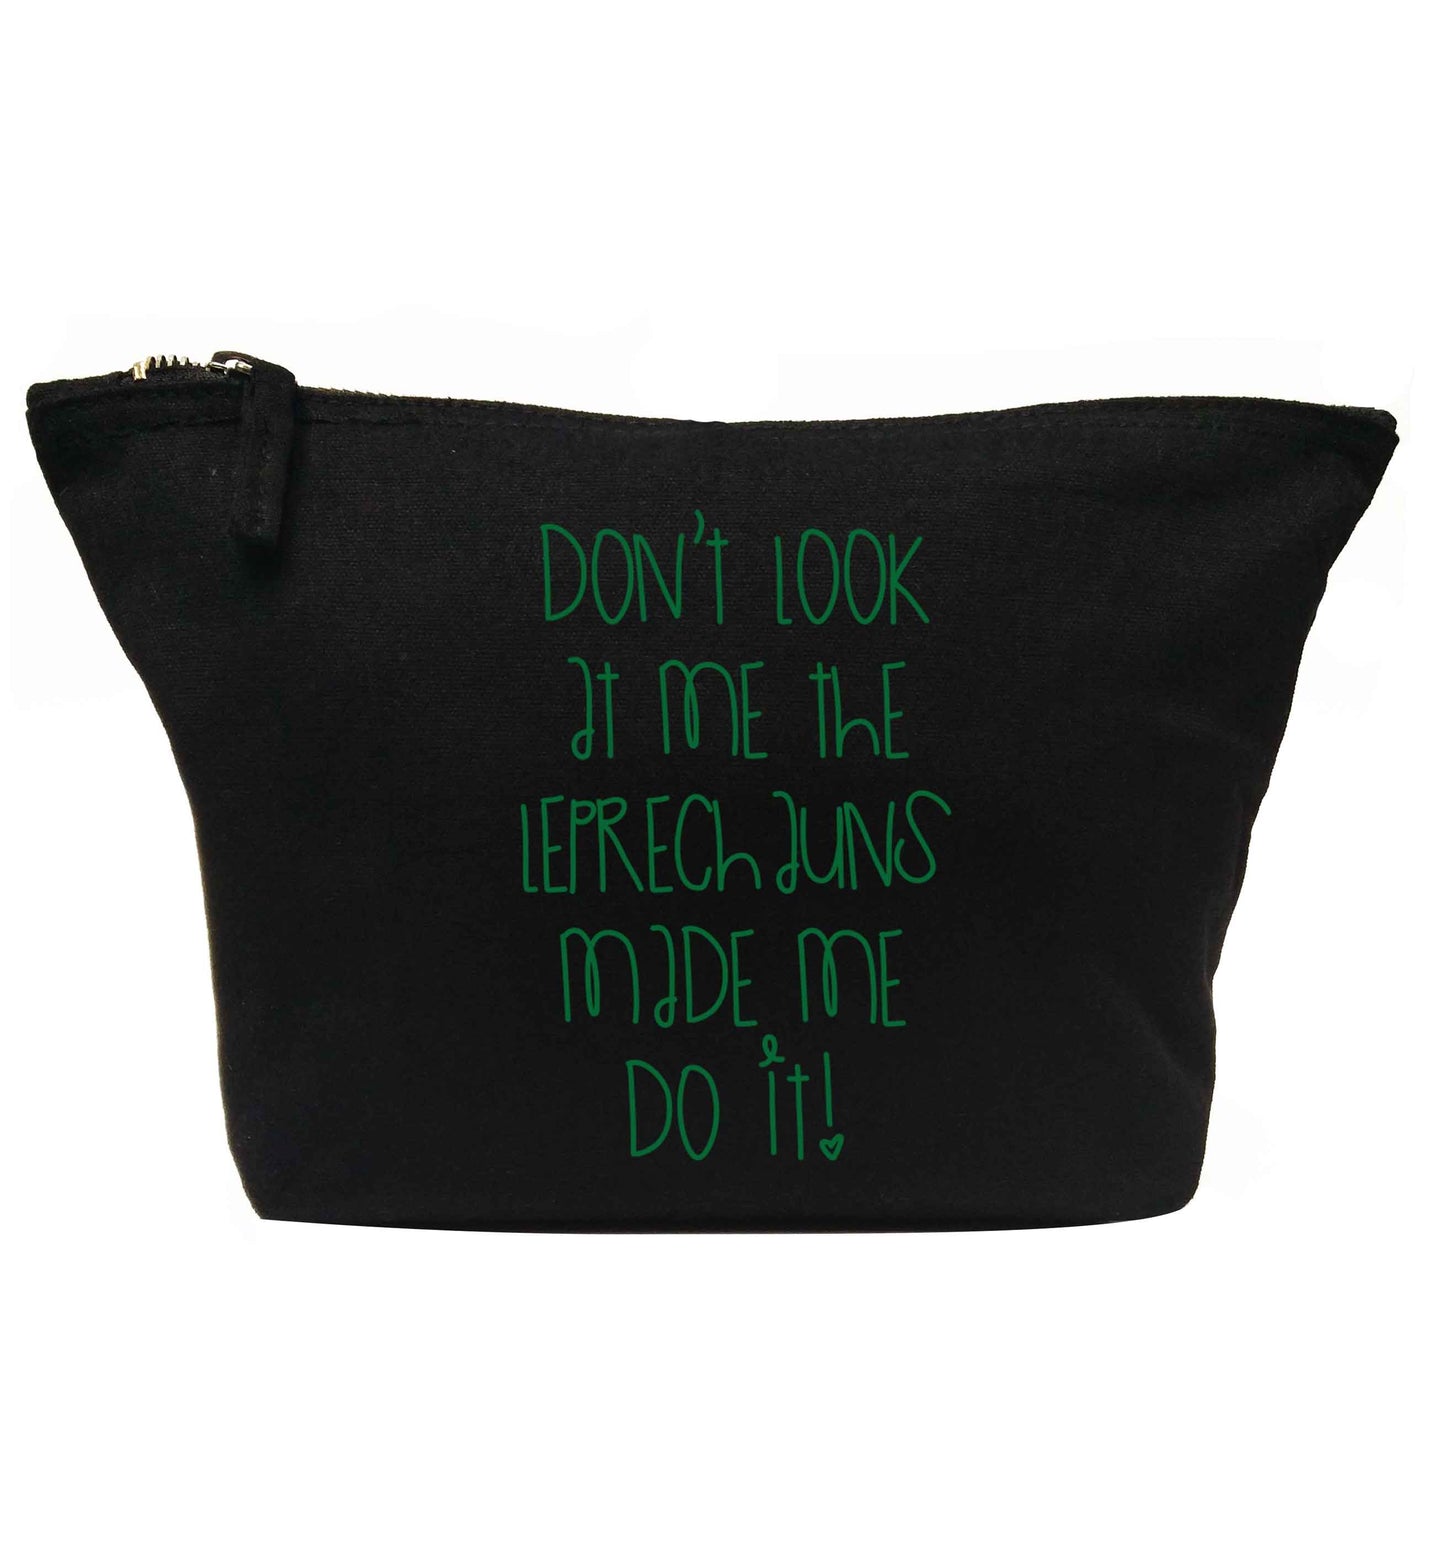 Don't look at me the leprechauns made me do it | Makeup / wash bag